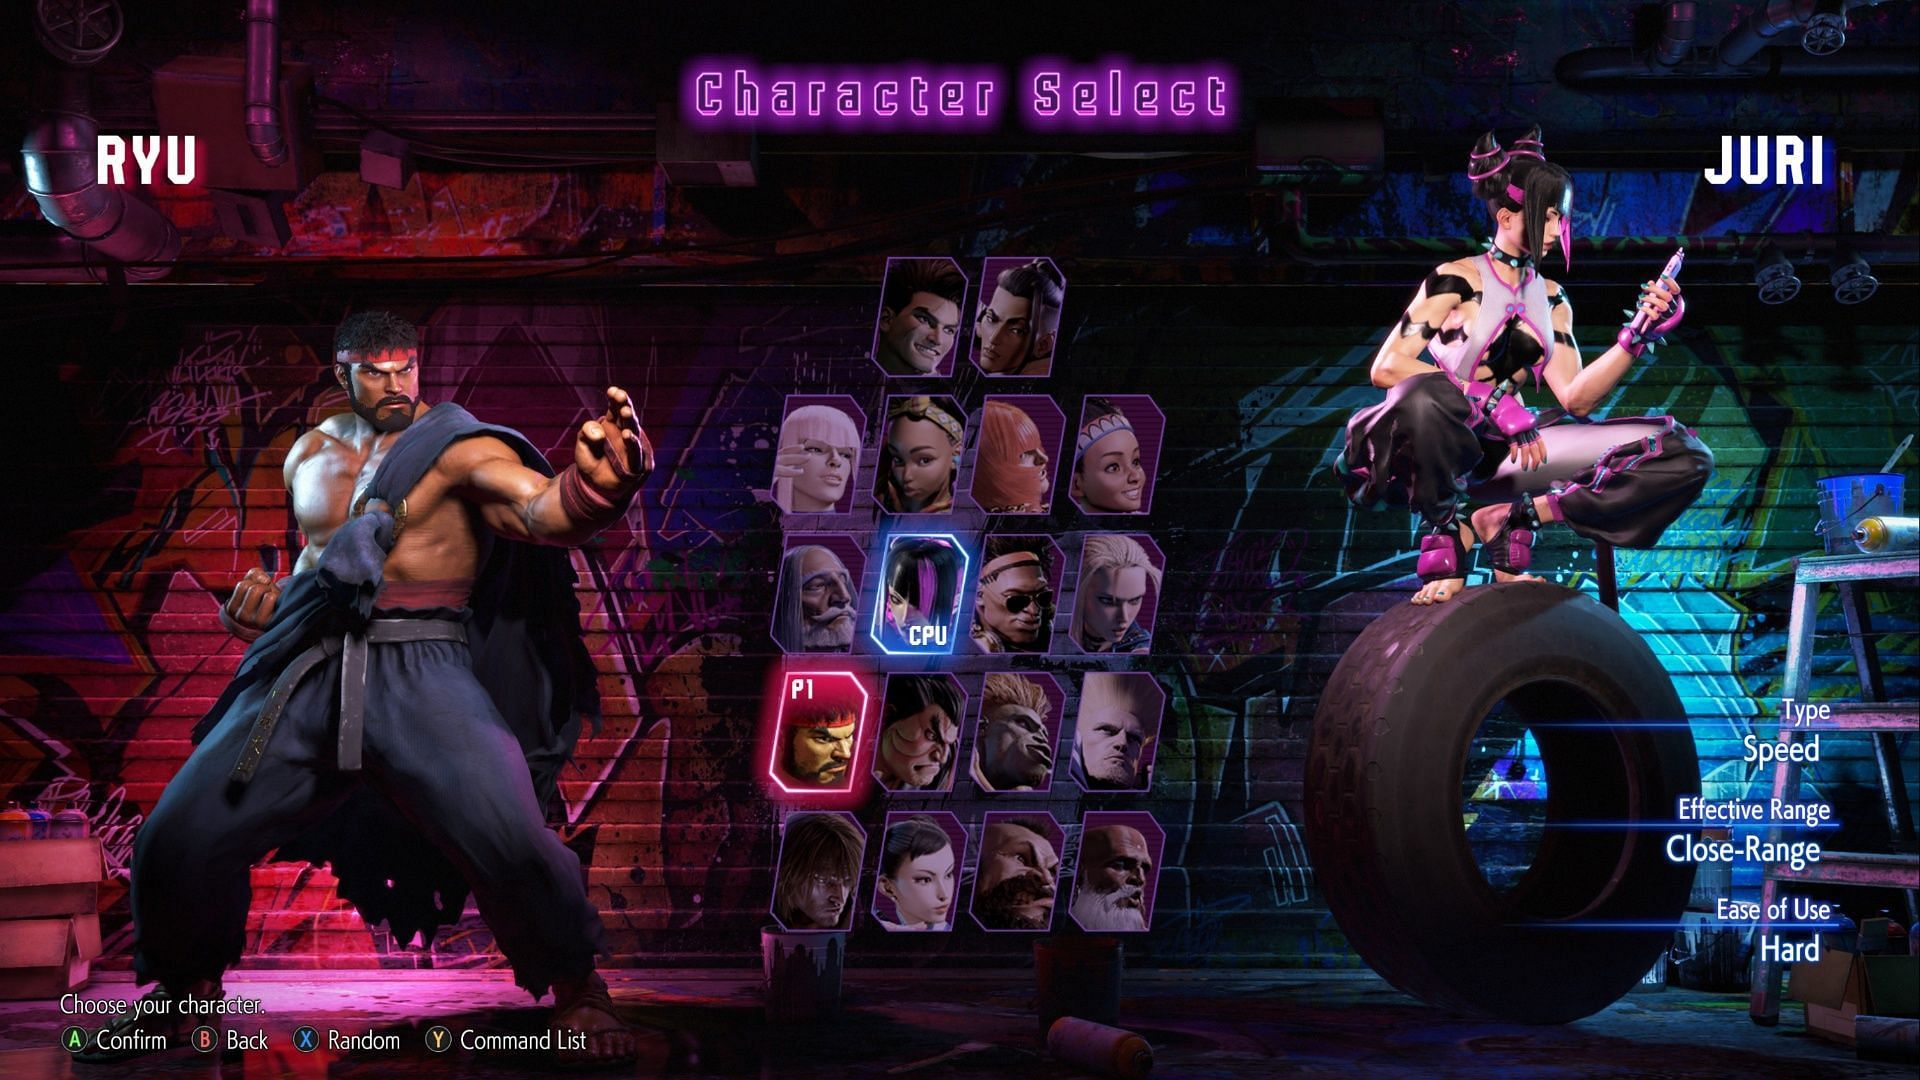 The Complete List of Street Fighter Characters by